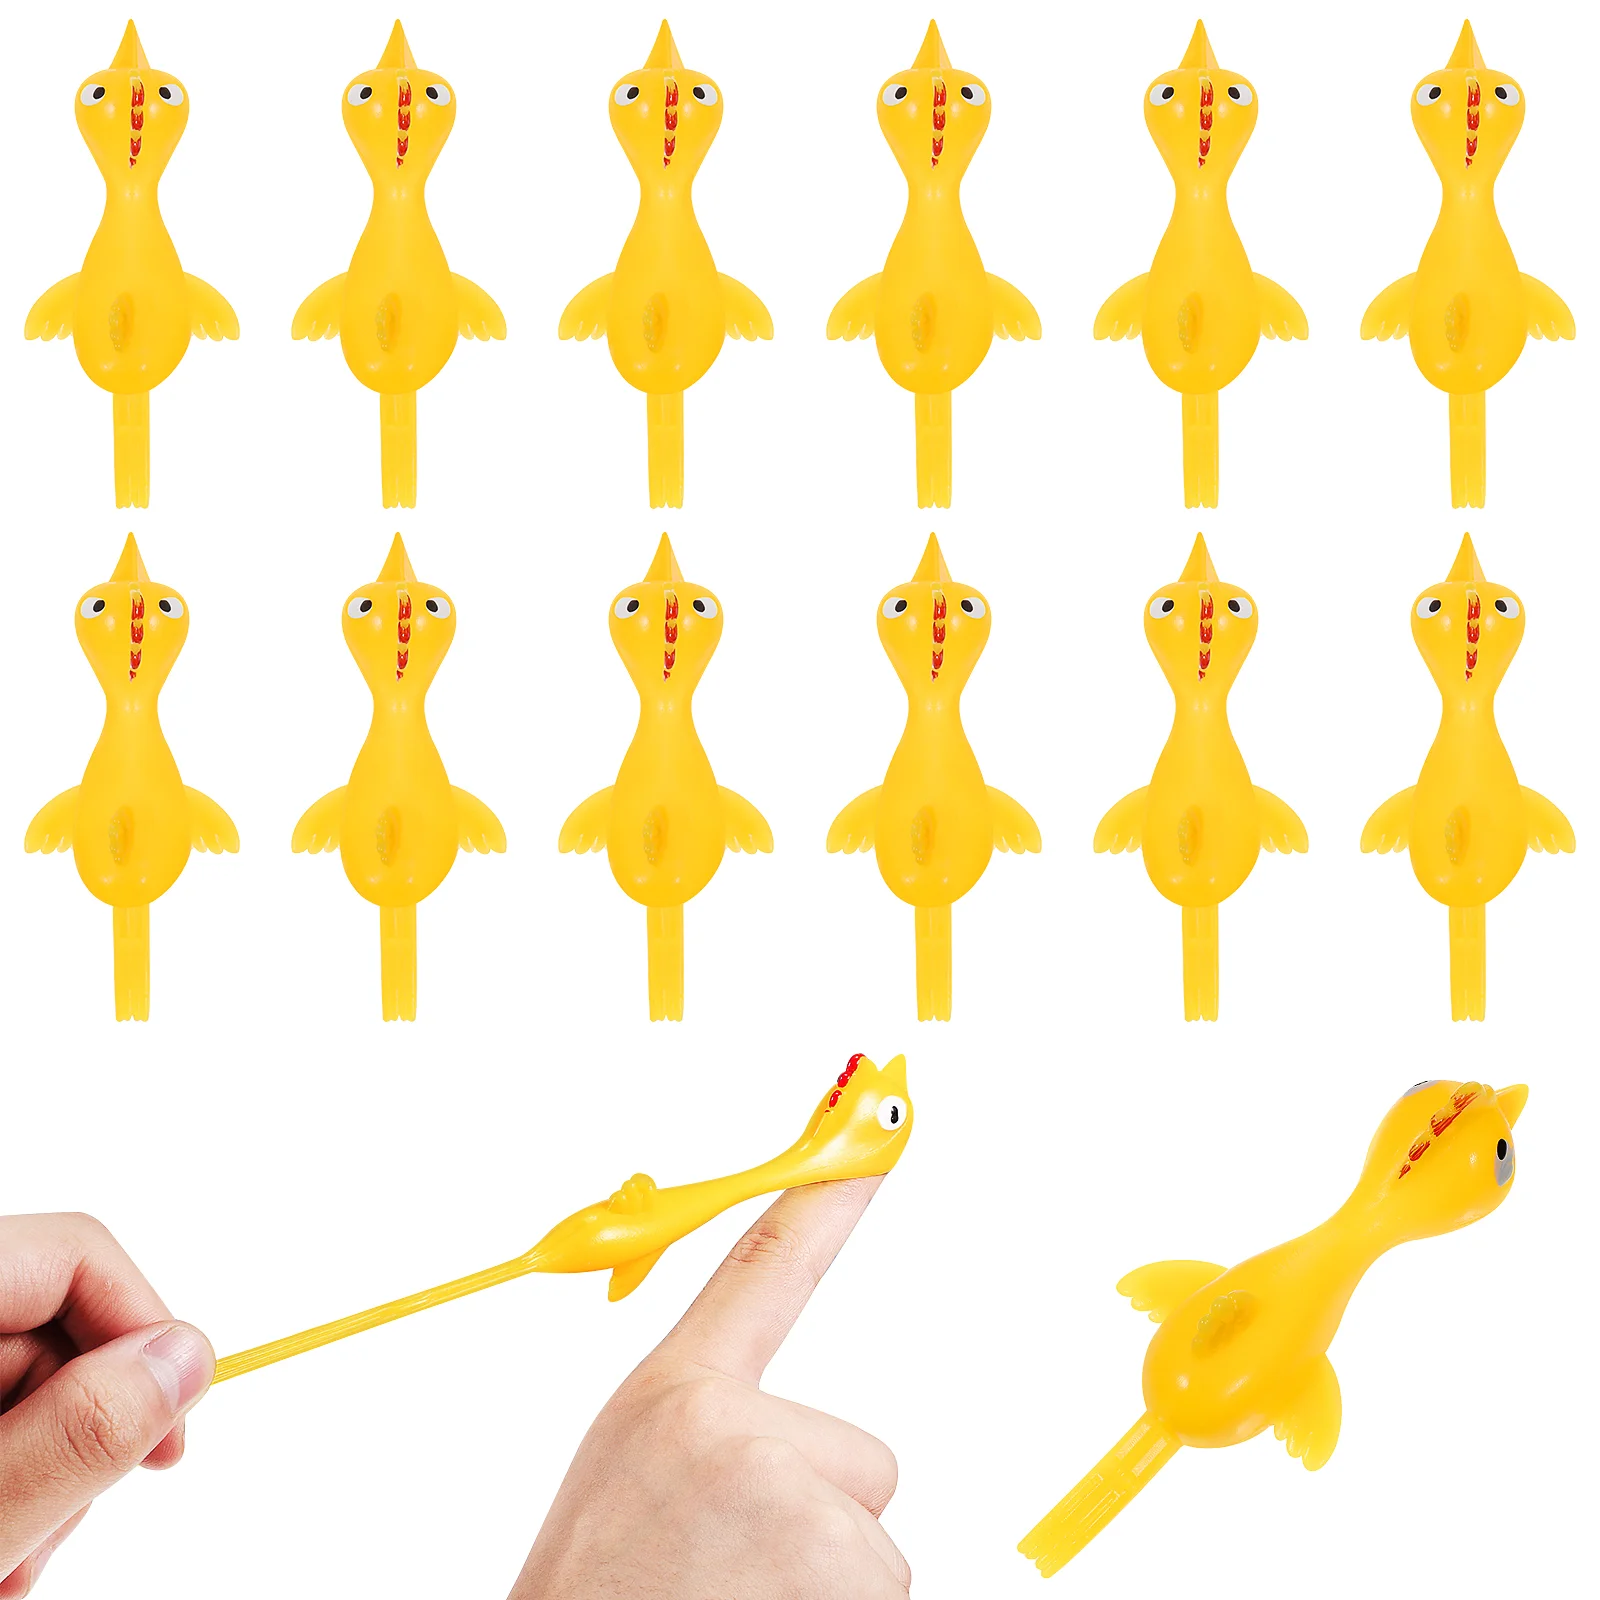 

Flick Chickens Rubber Stretchy Flying Chickens Fingers Stretchy Chicks Rubber Chicken Ornament Chickens Flick Favors